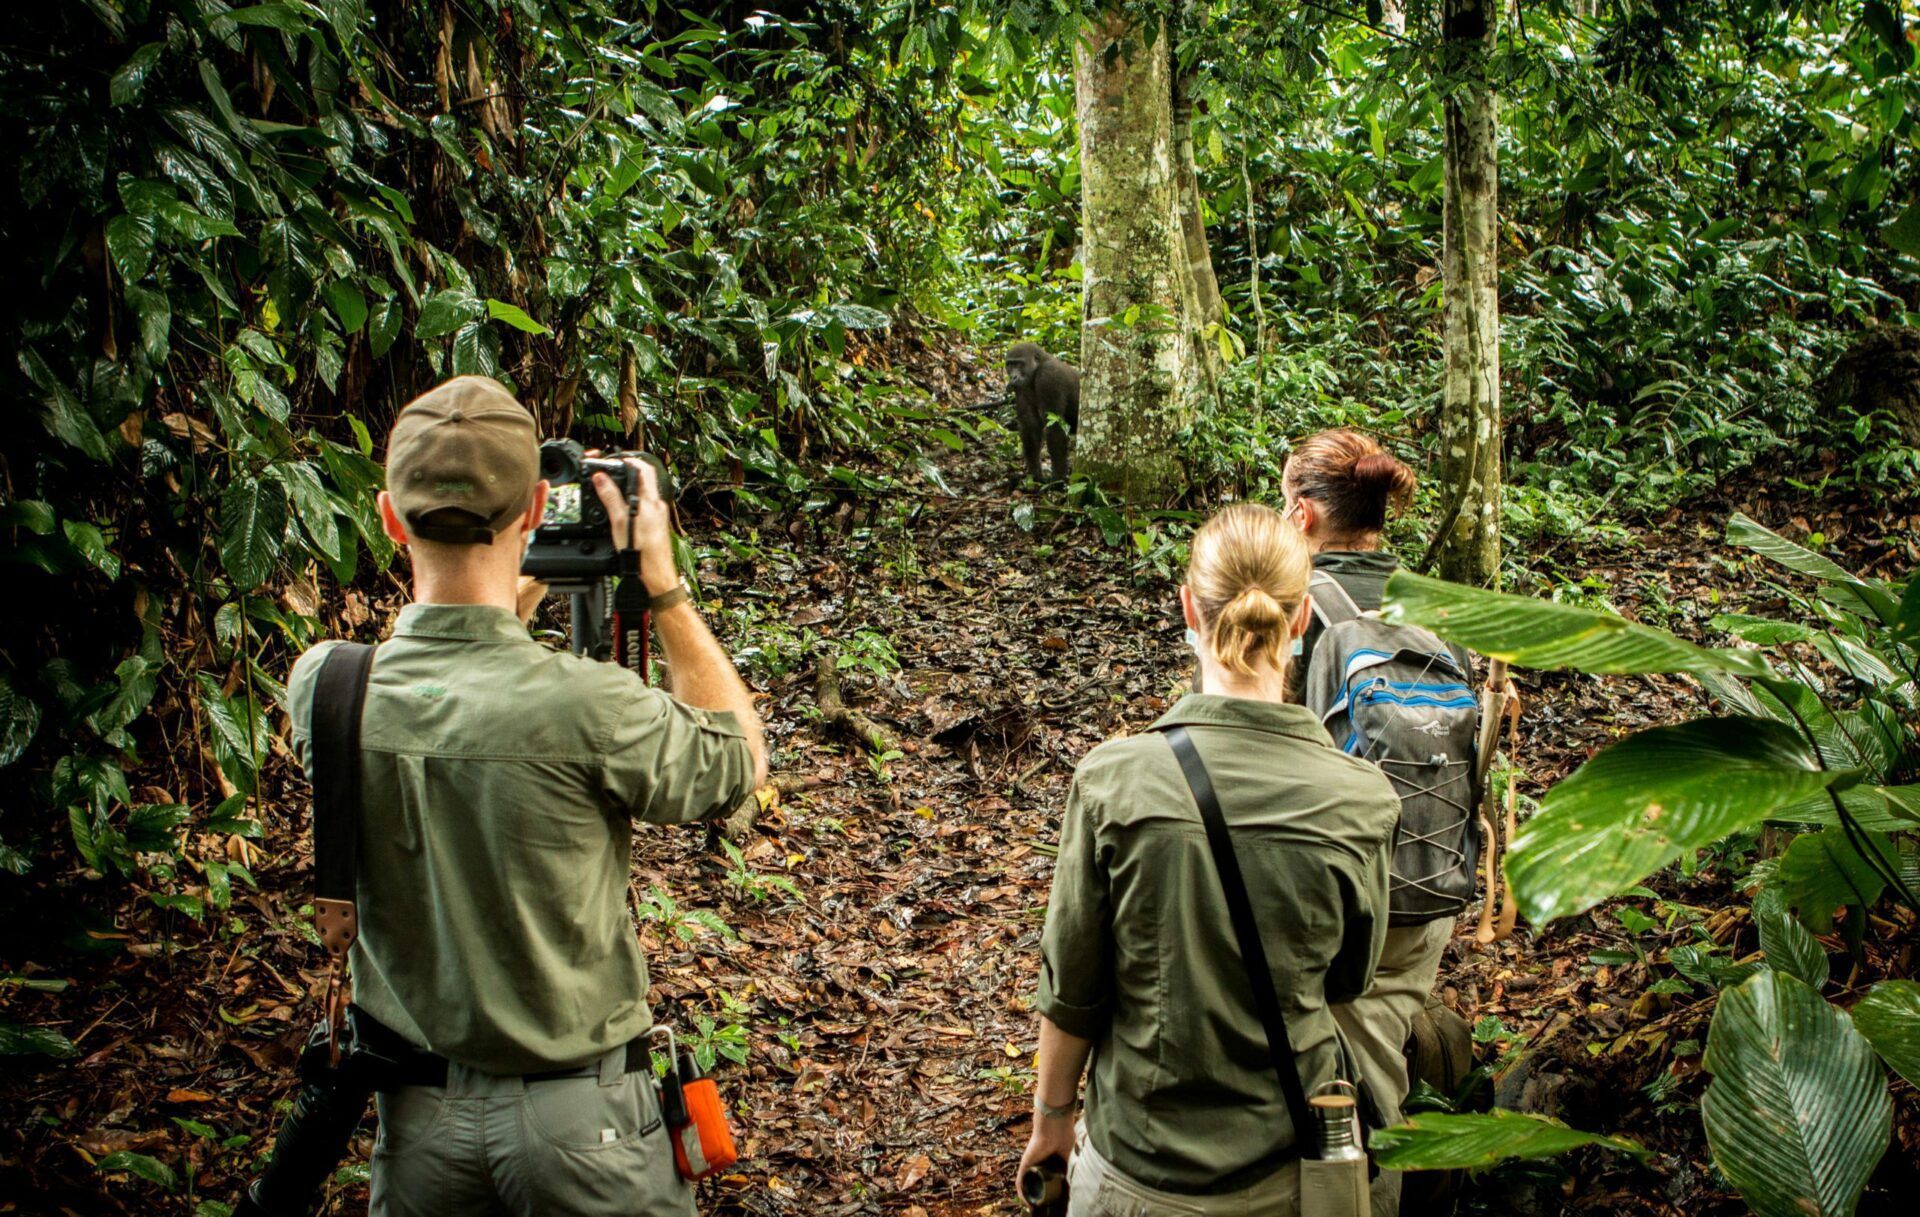 Congo Ngaga Camp guests trekking and observing gorilla in distance